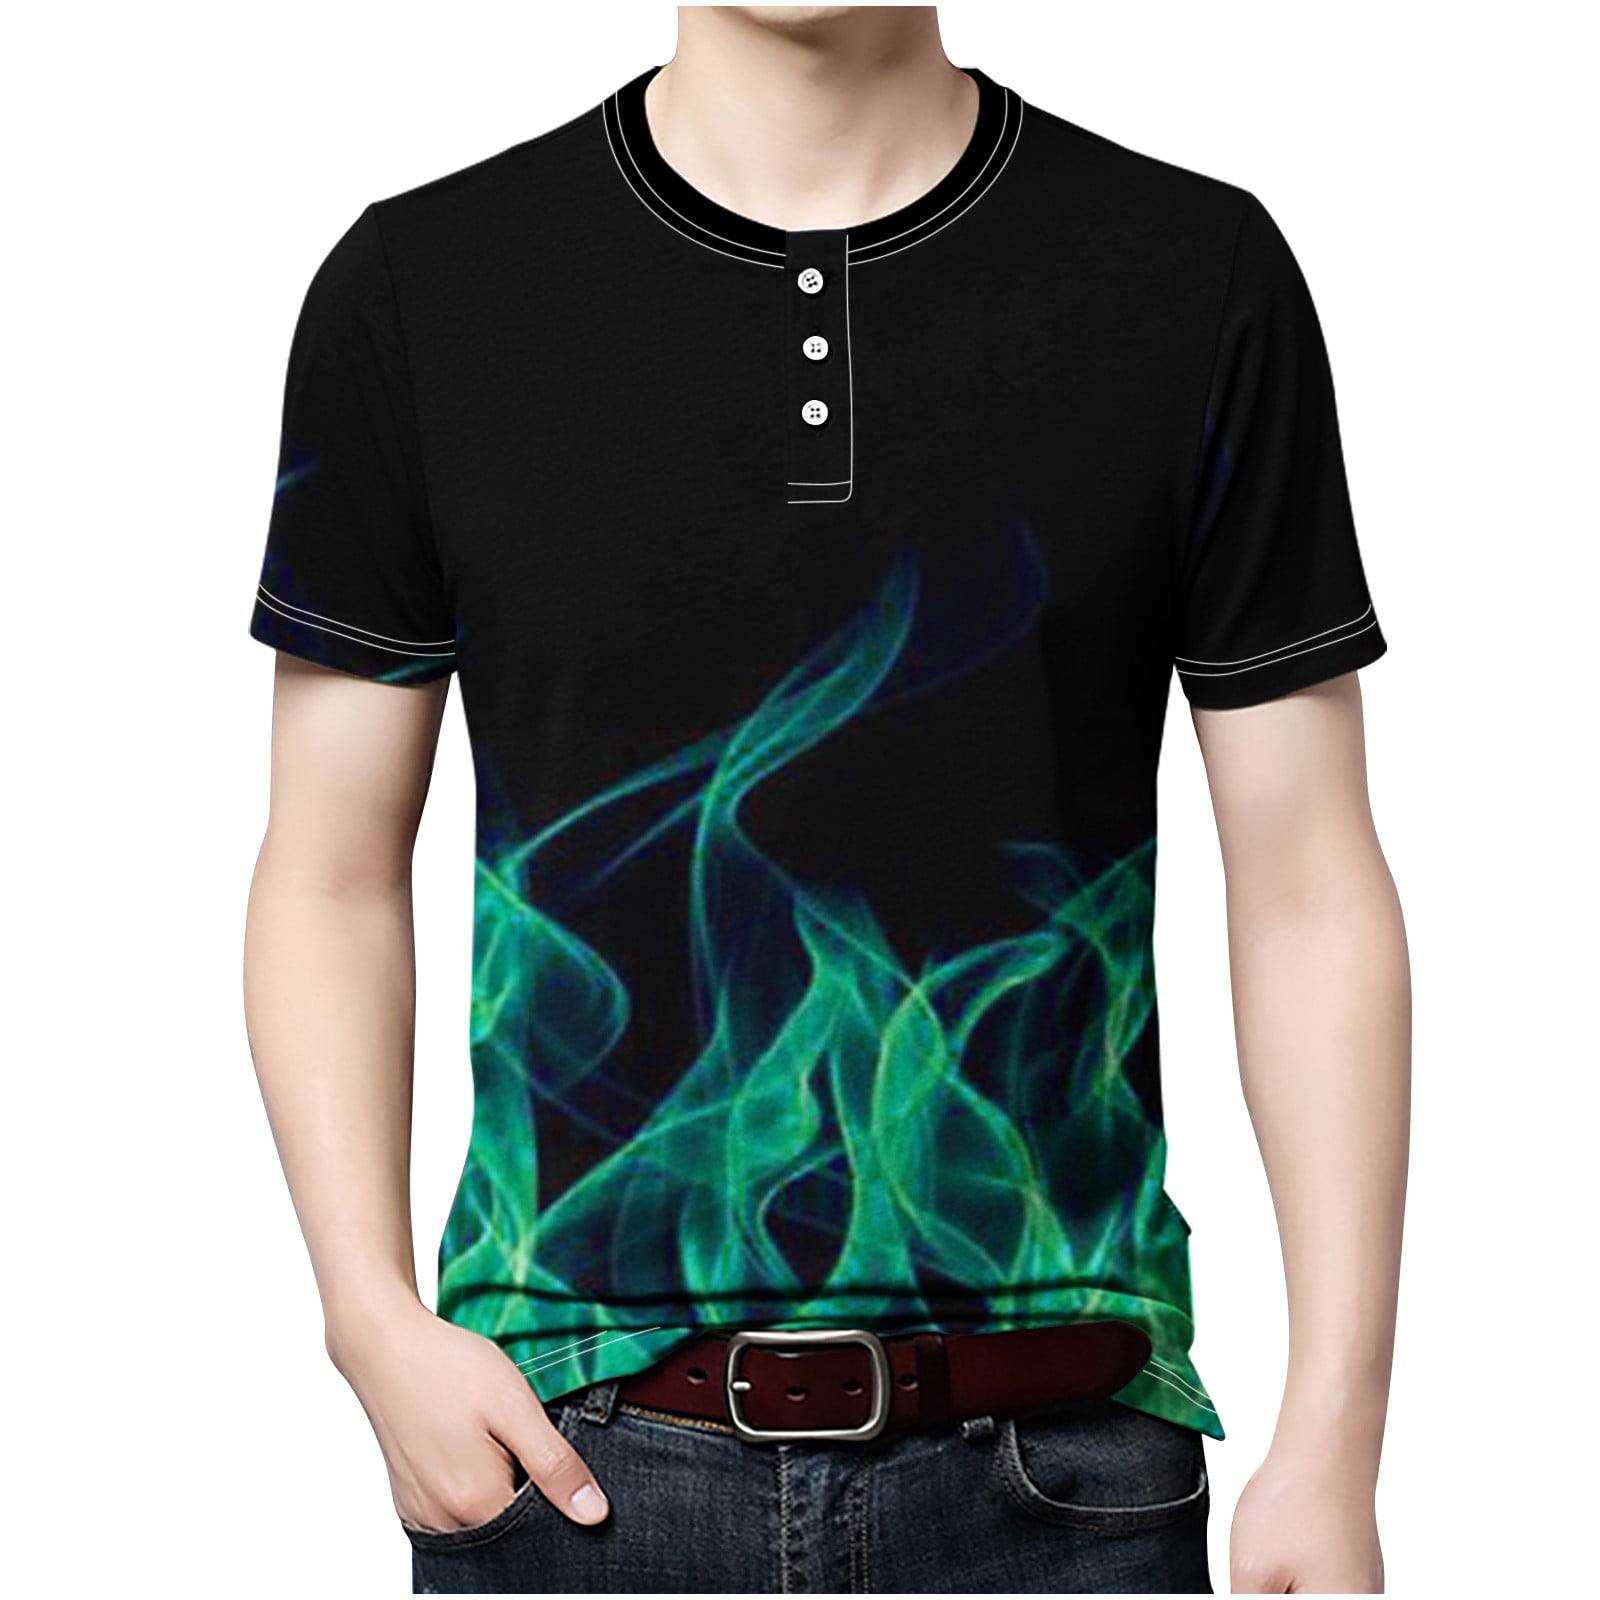 APEXFWDT Men's Big and Tall Graphic Tees Lightweight Flame Printed ...